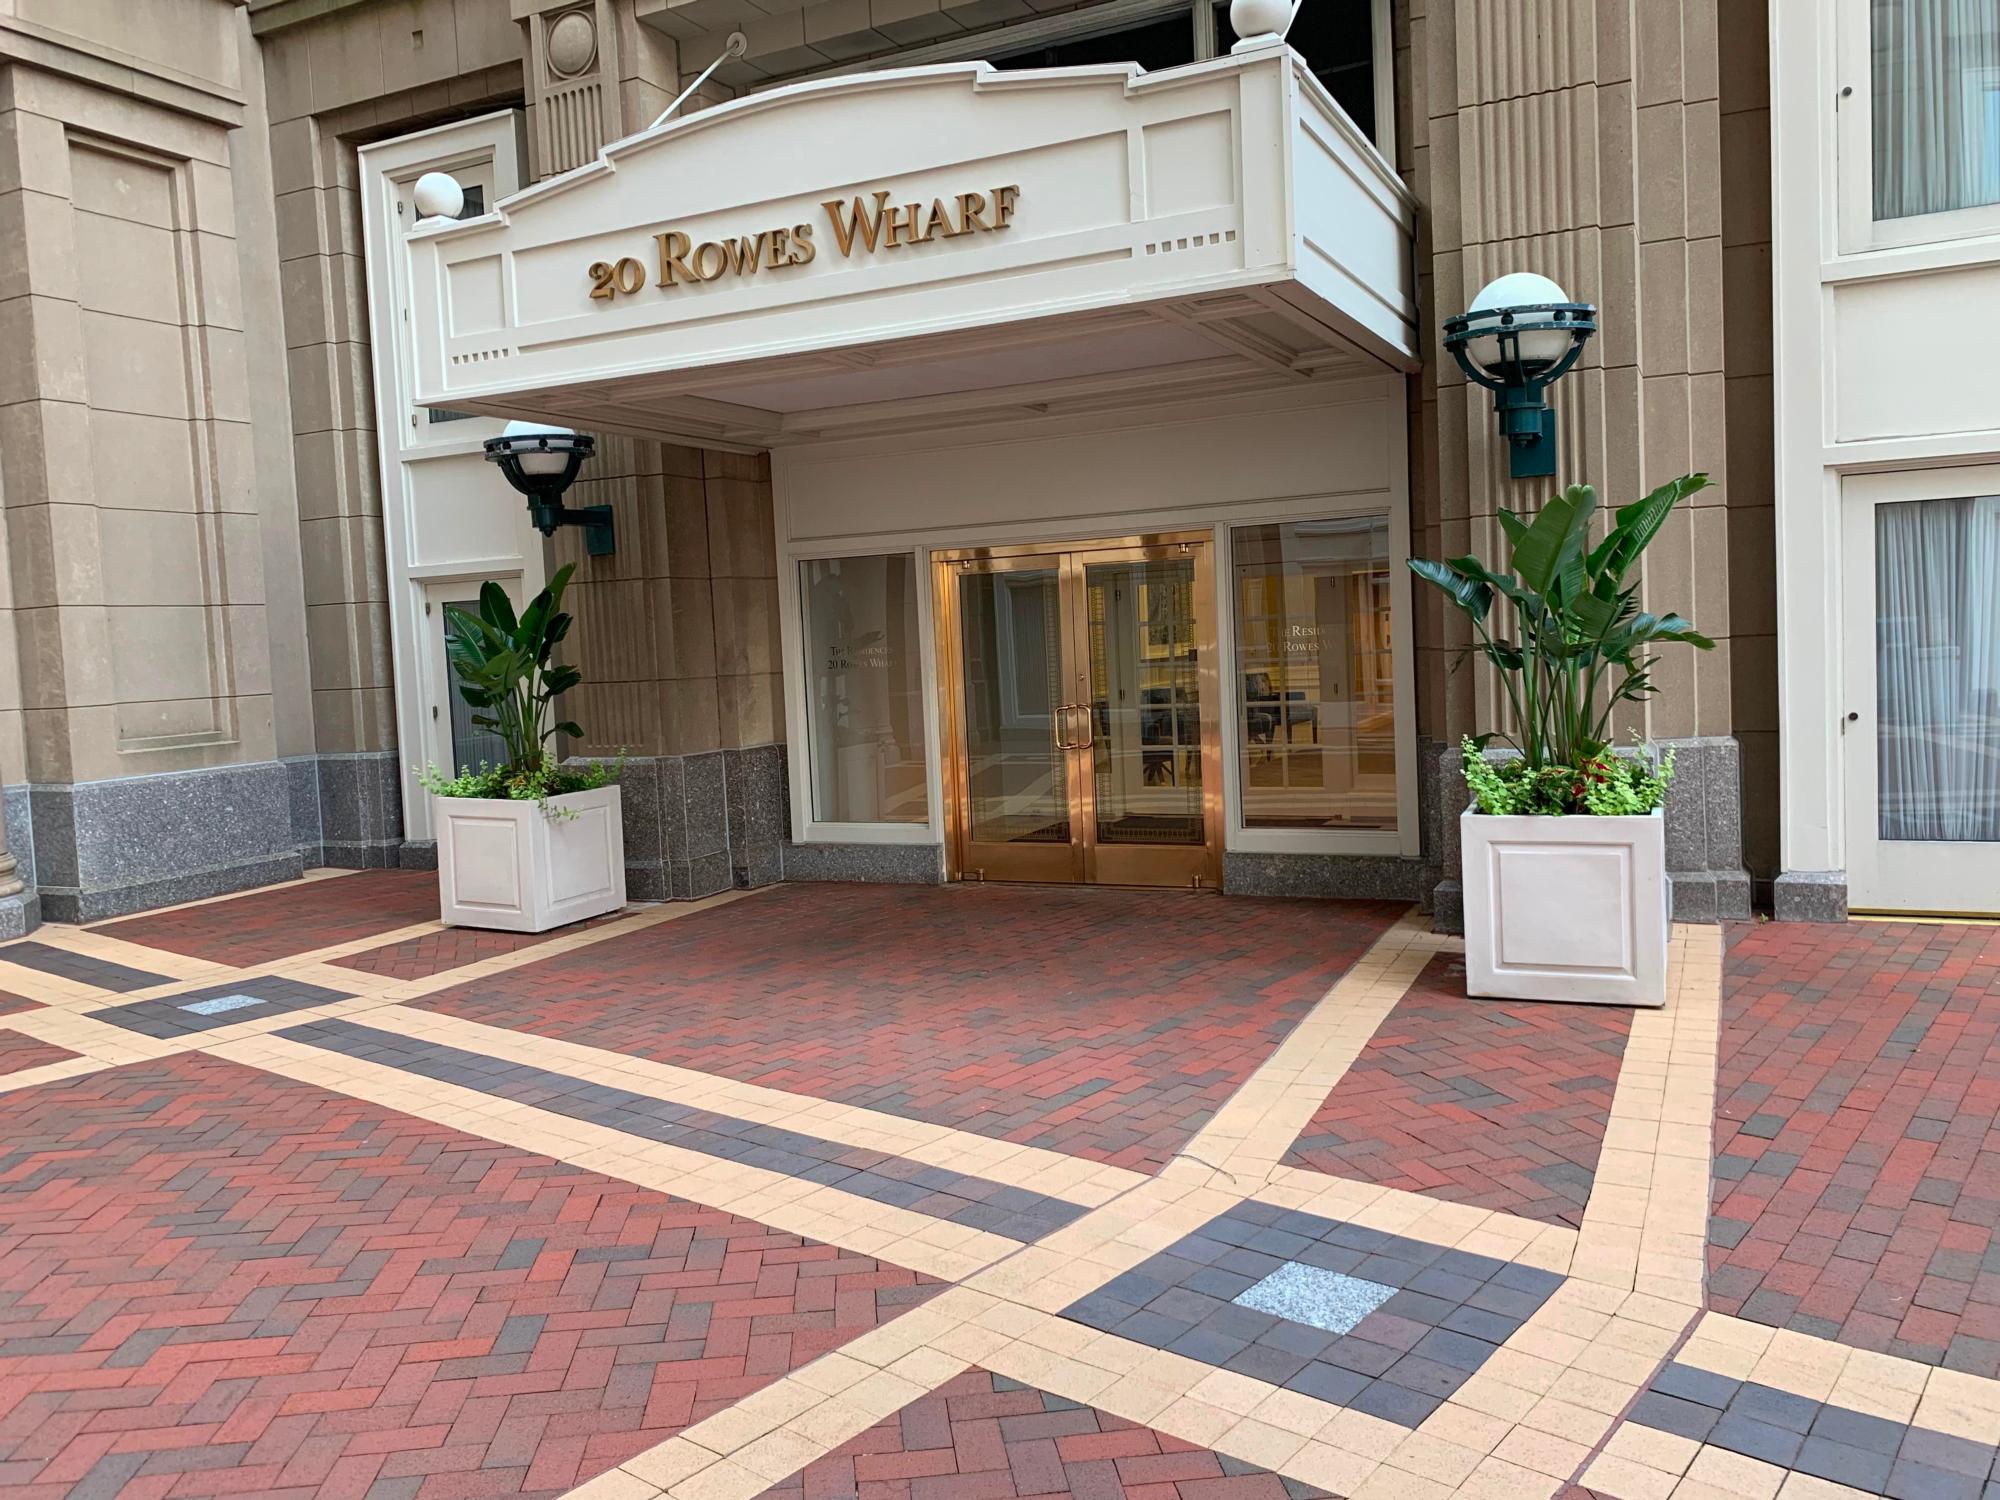 Image of the brick walkway at Rowes Wharf Hotel